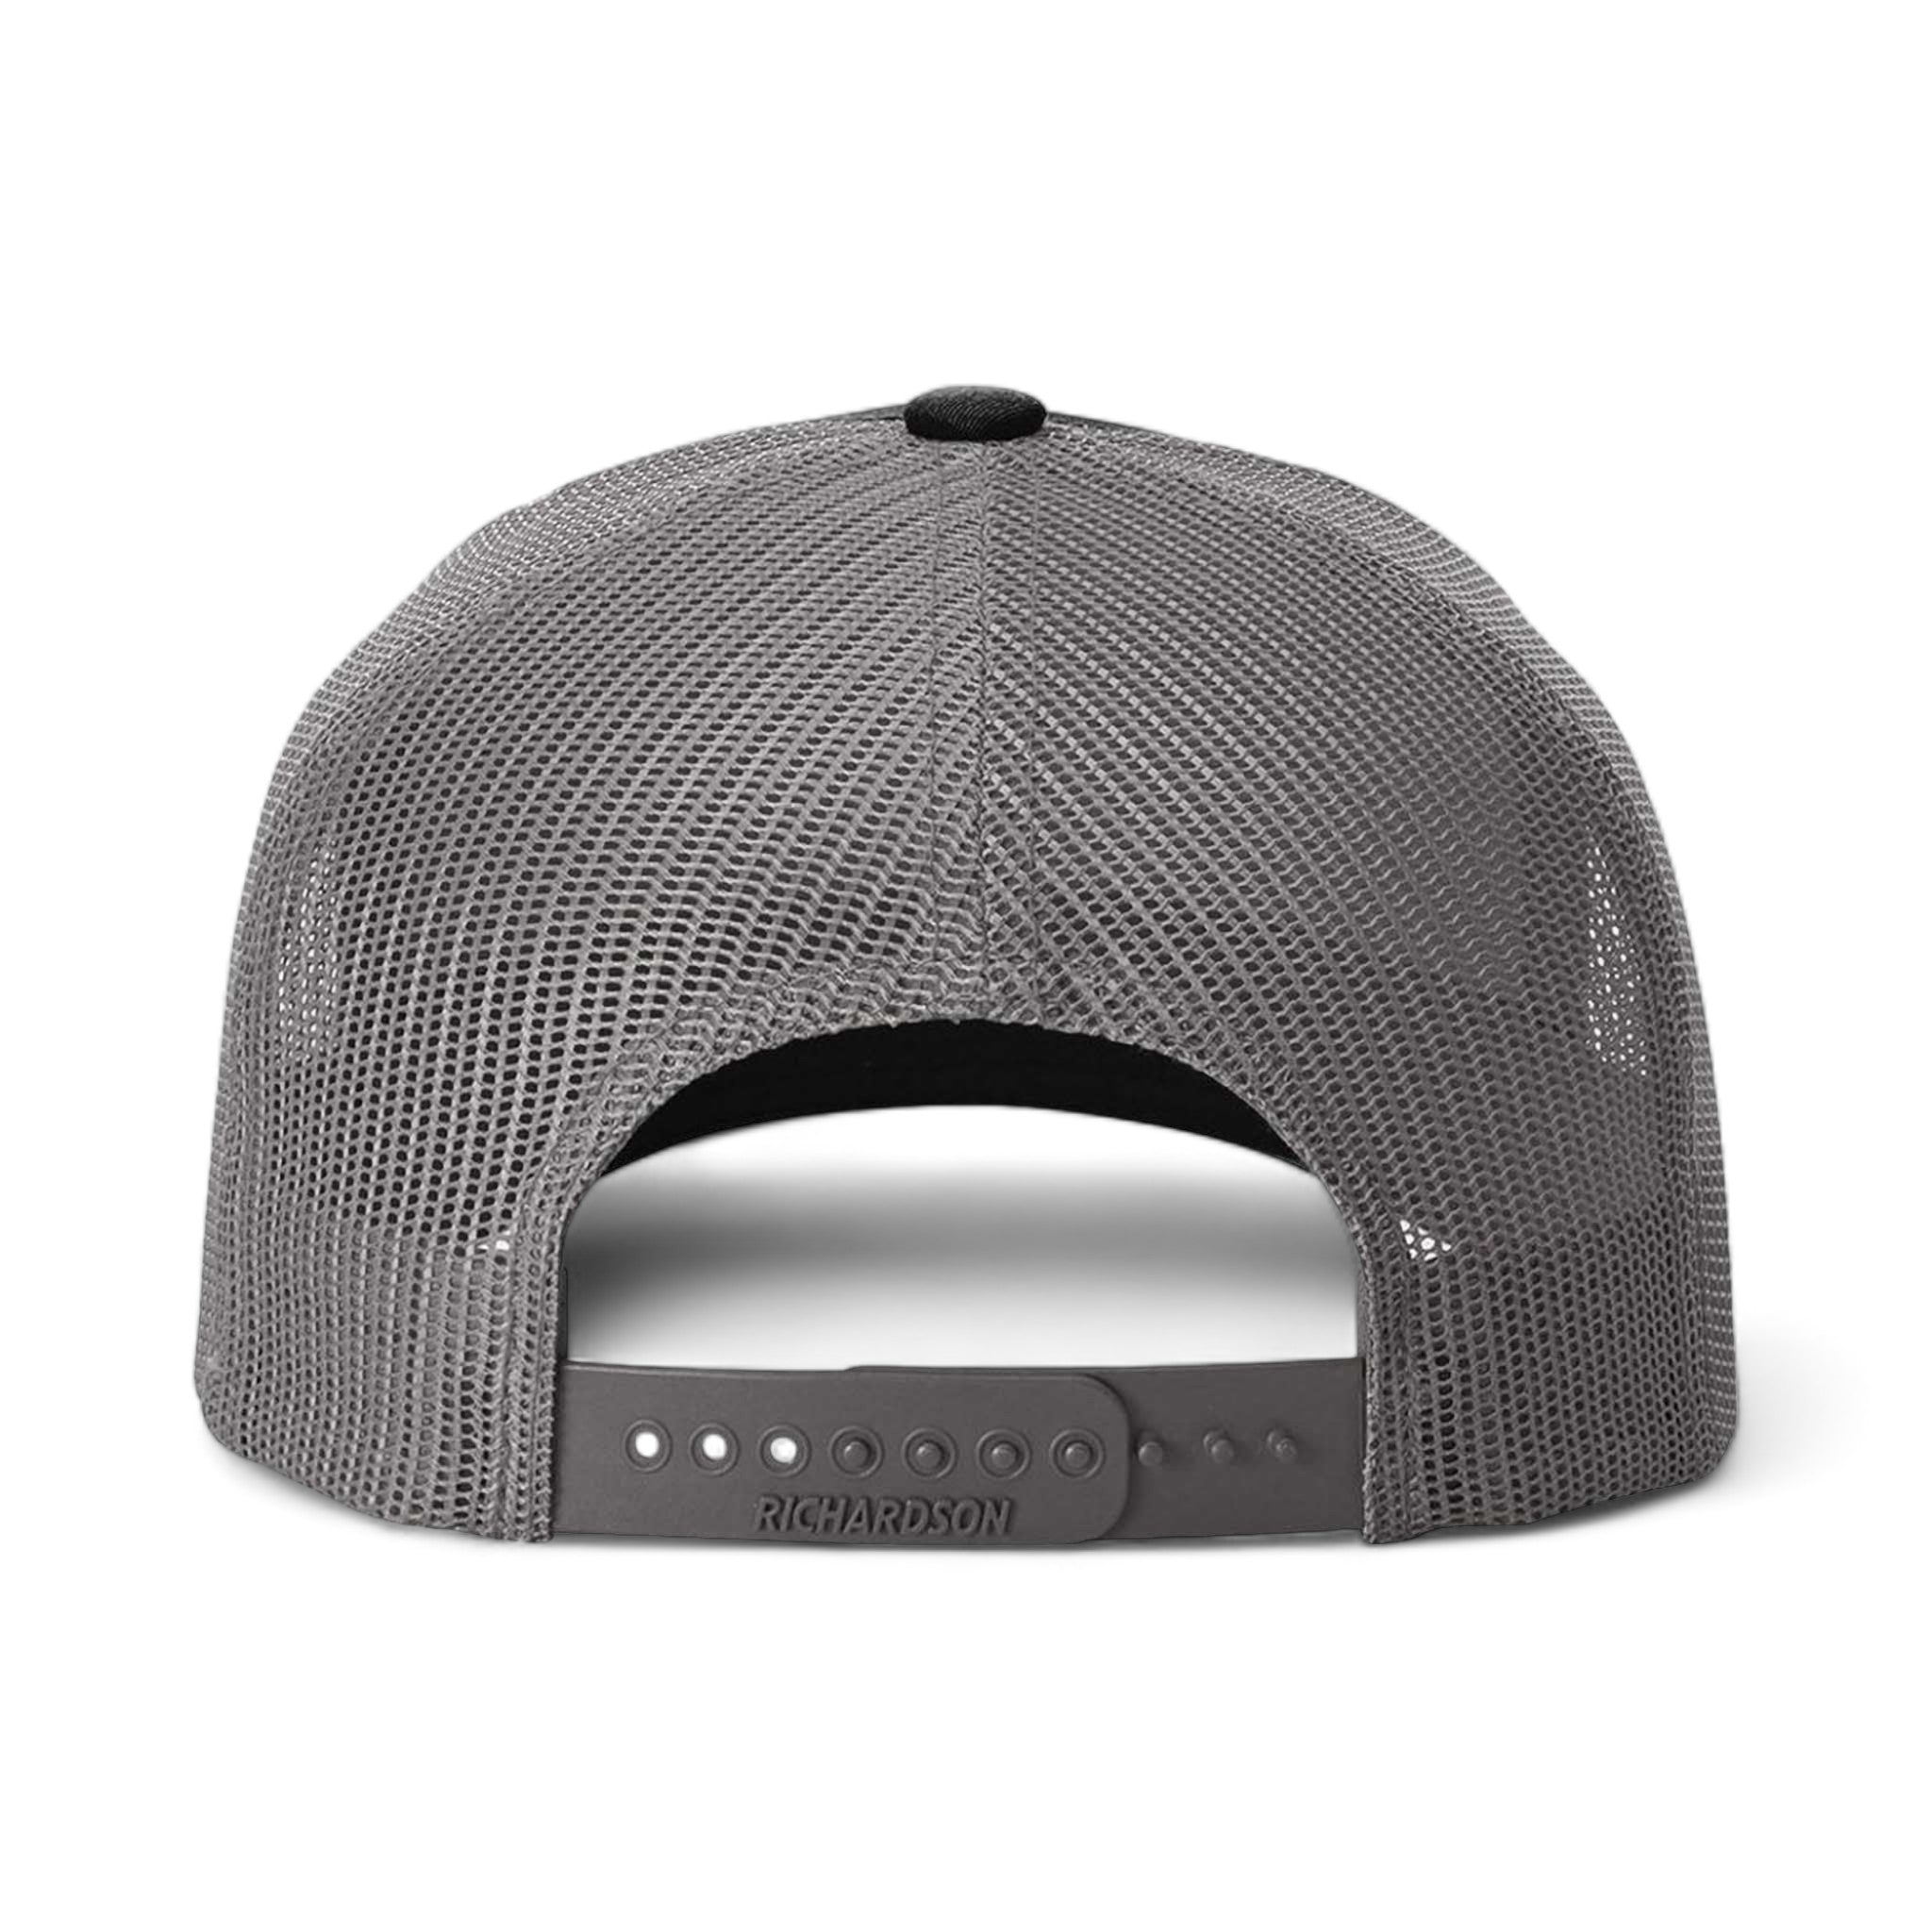 Back view of Richardson 112FPR custom hat in black and charcoal